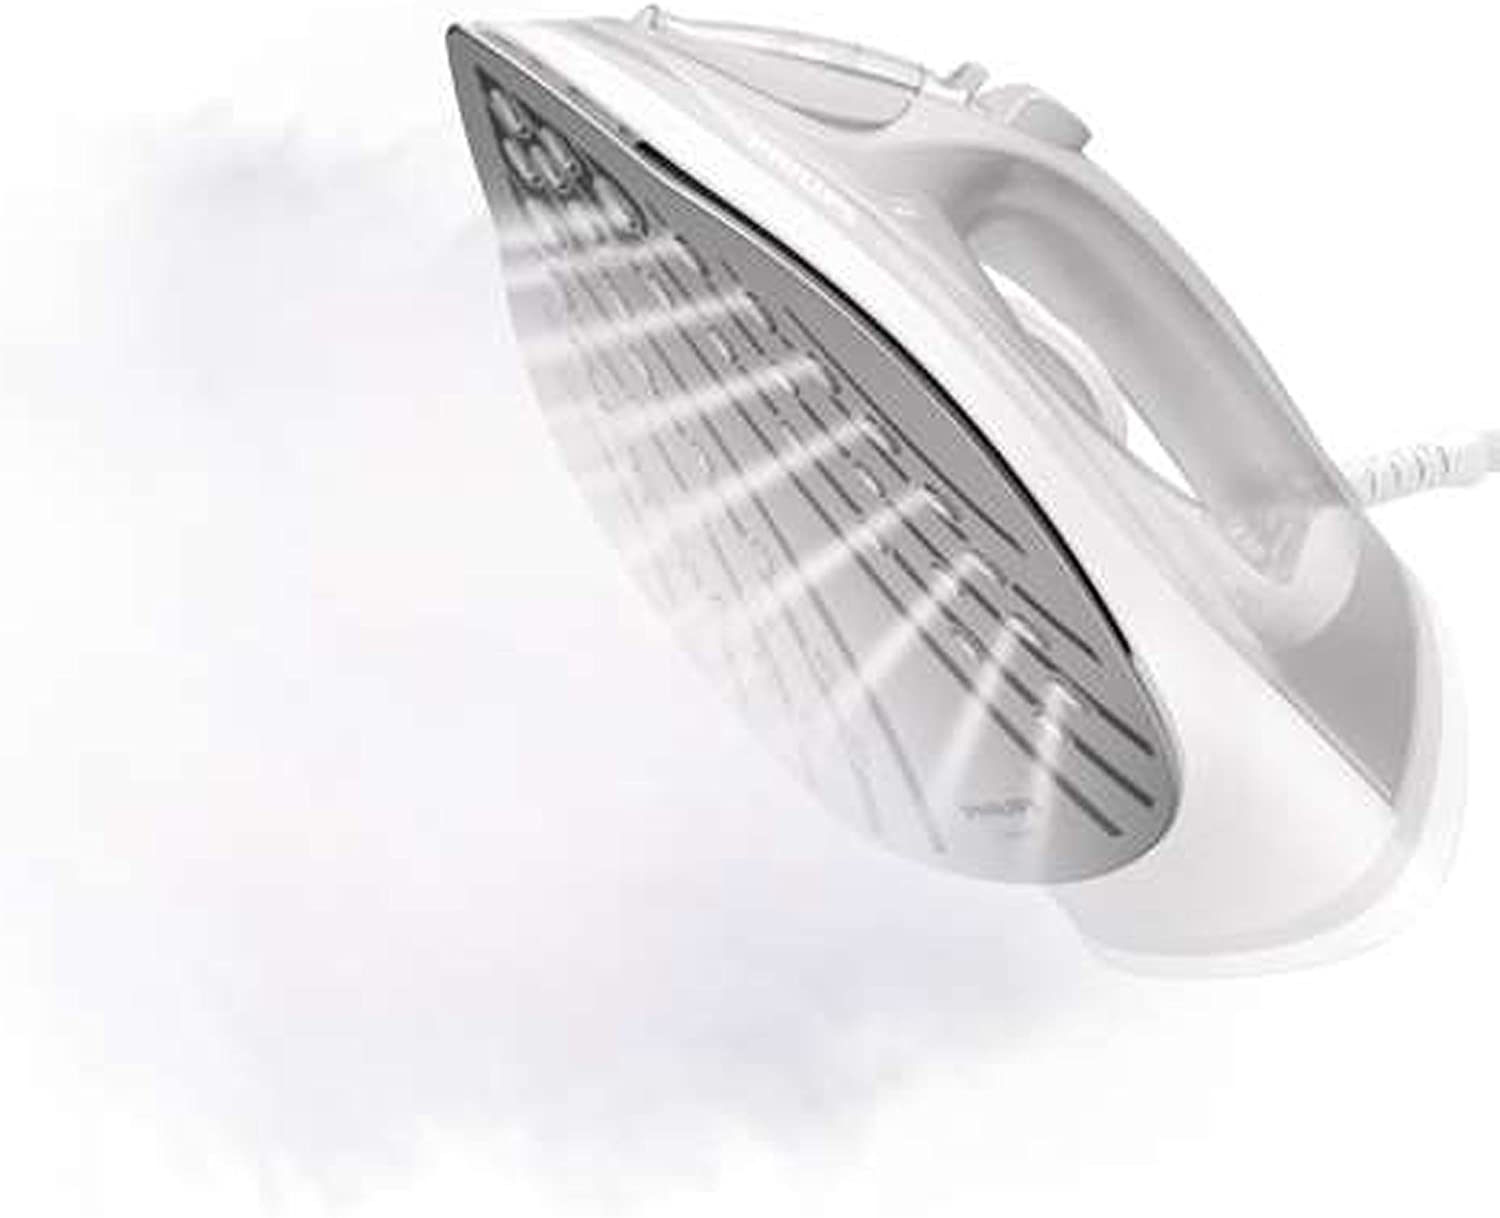 Philips Steam Iron - GC2675 | reliable performance | lightweight | variable steam settings | safety features | stylish | even heat distribution | Halabh.com